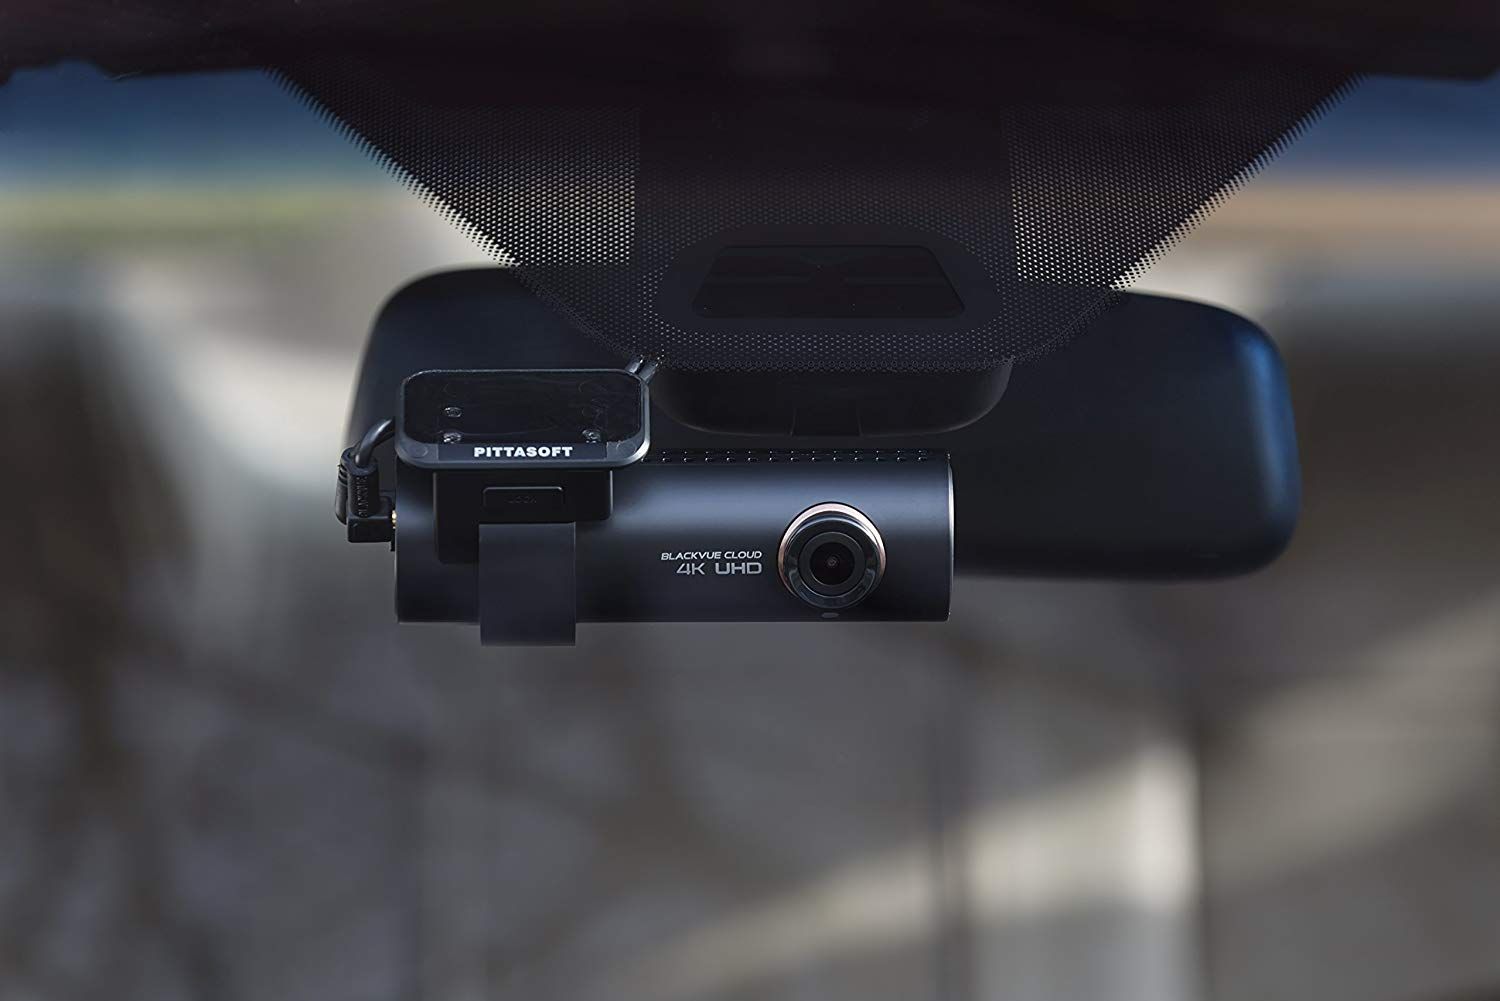 download the new Dashcam Viewer Plus 3.9.2